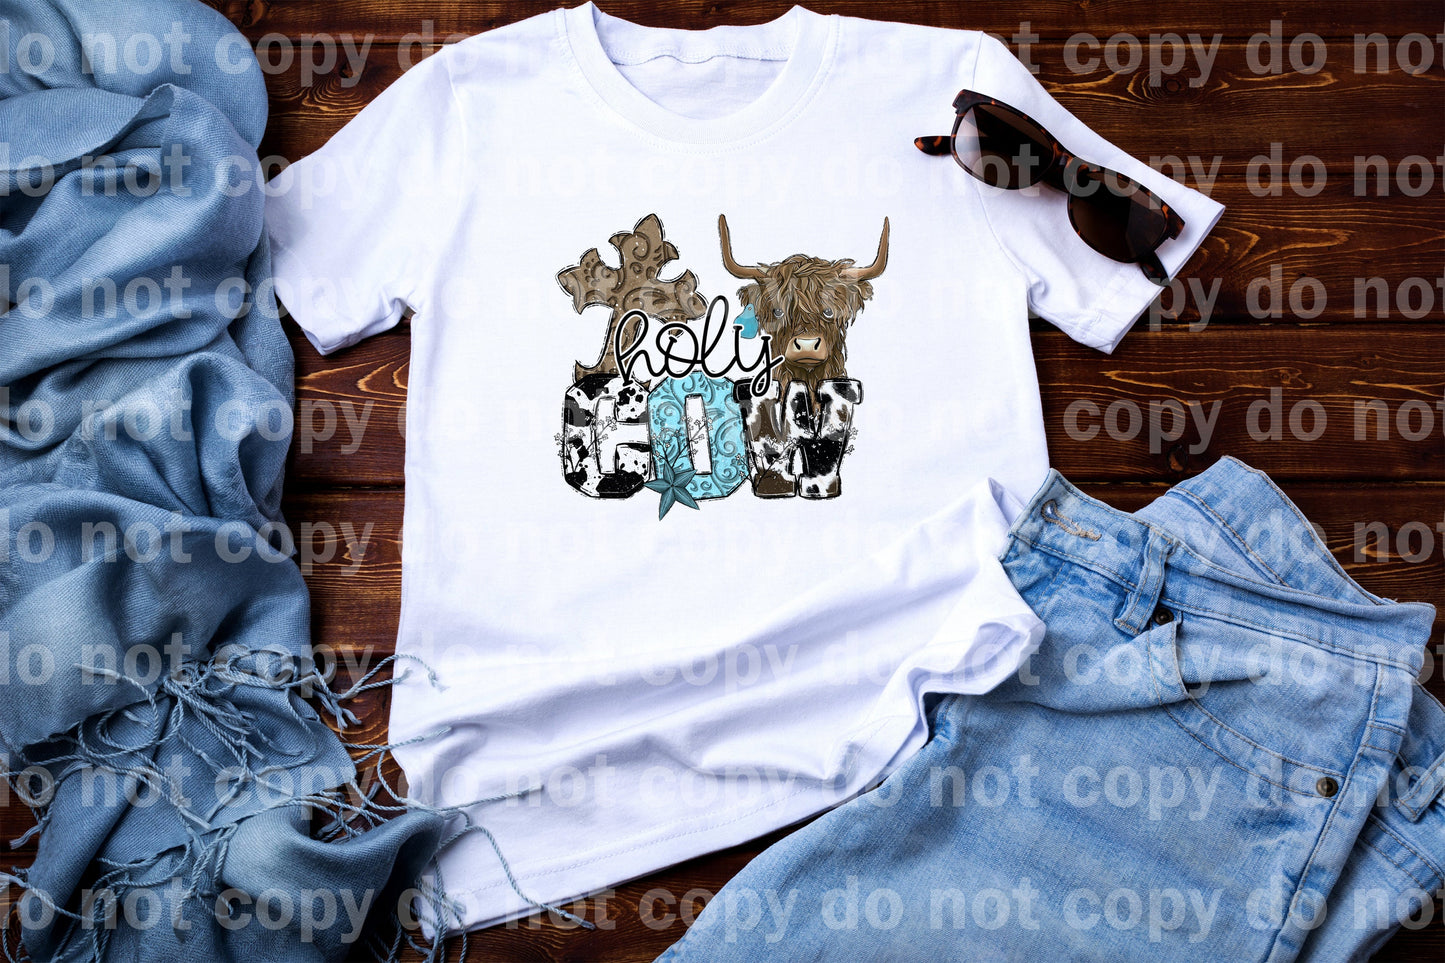 Holy Cow Dream Print or Sublimation Print